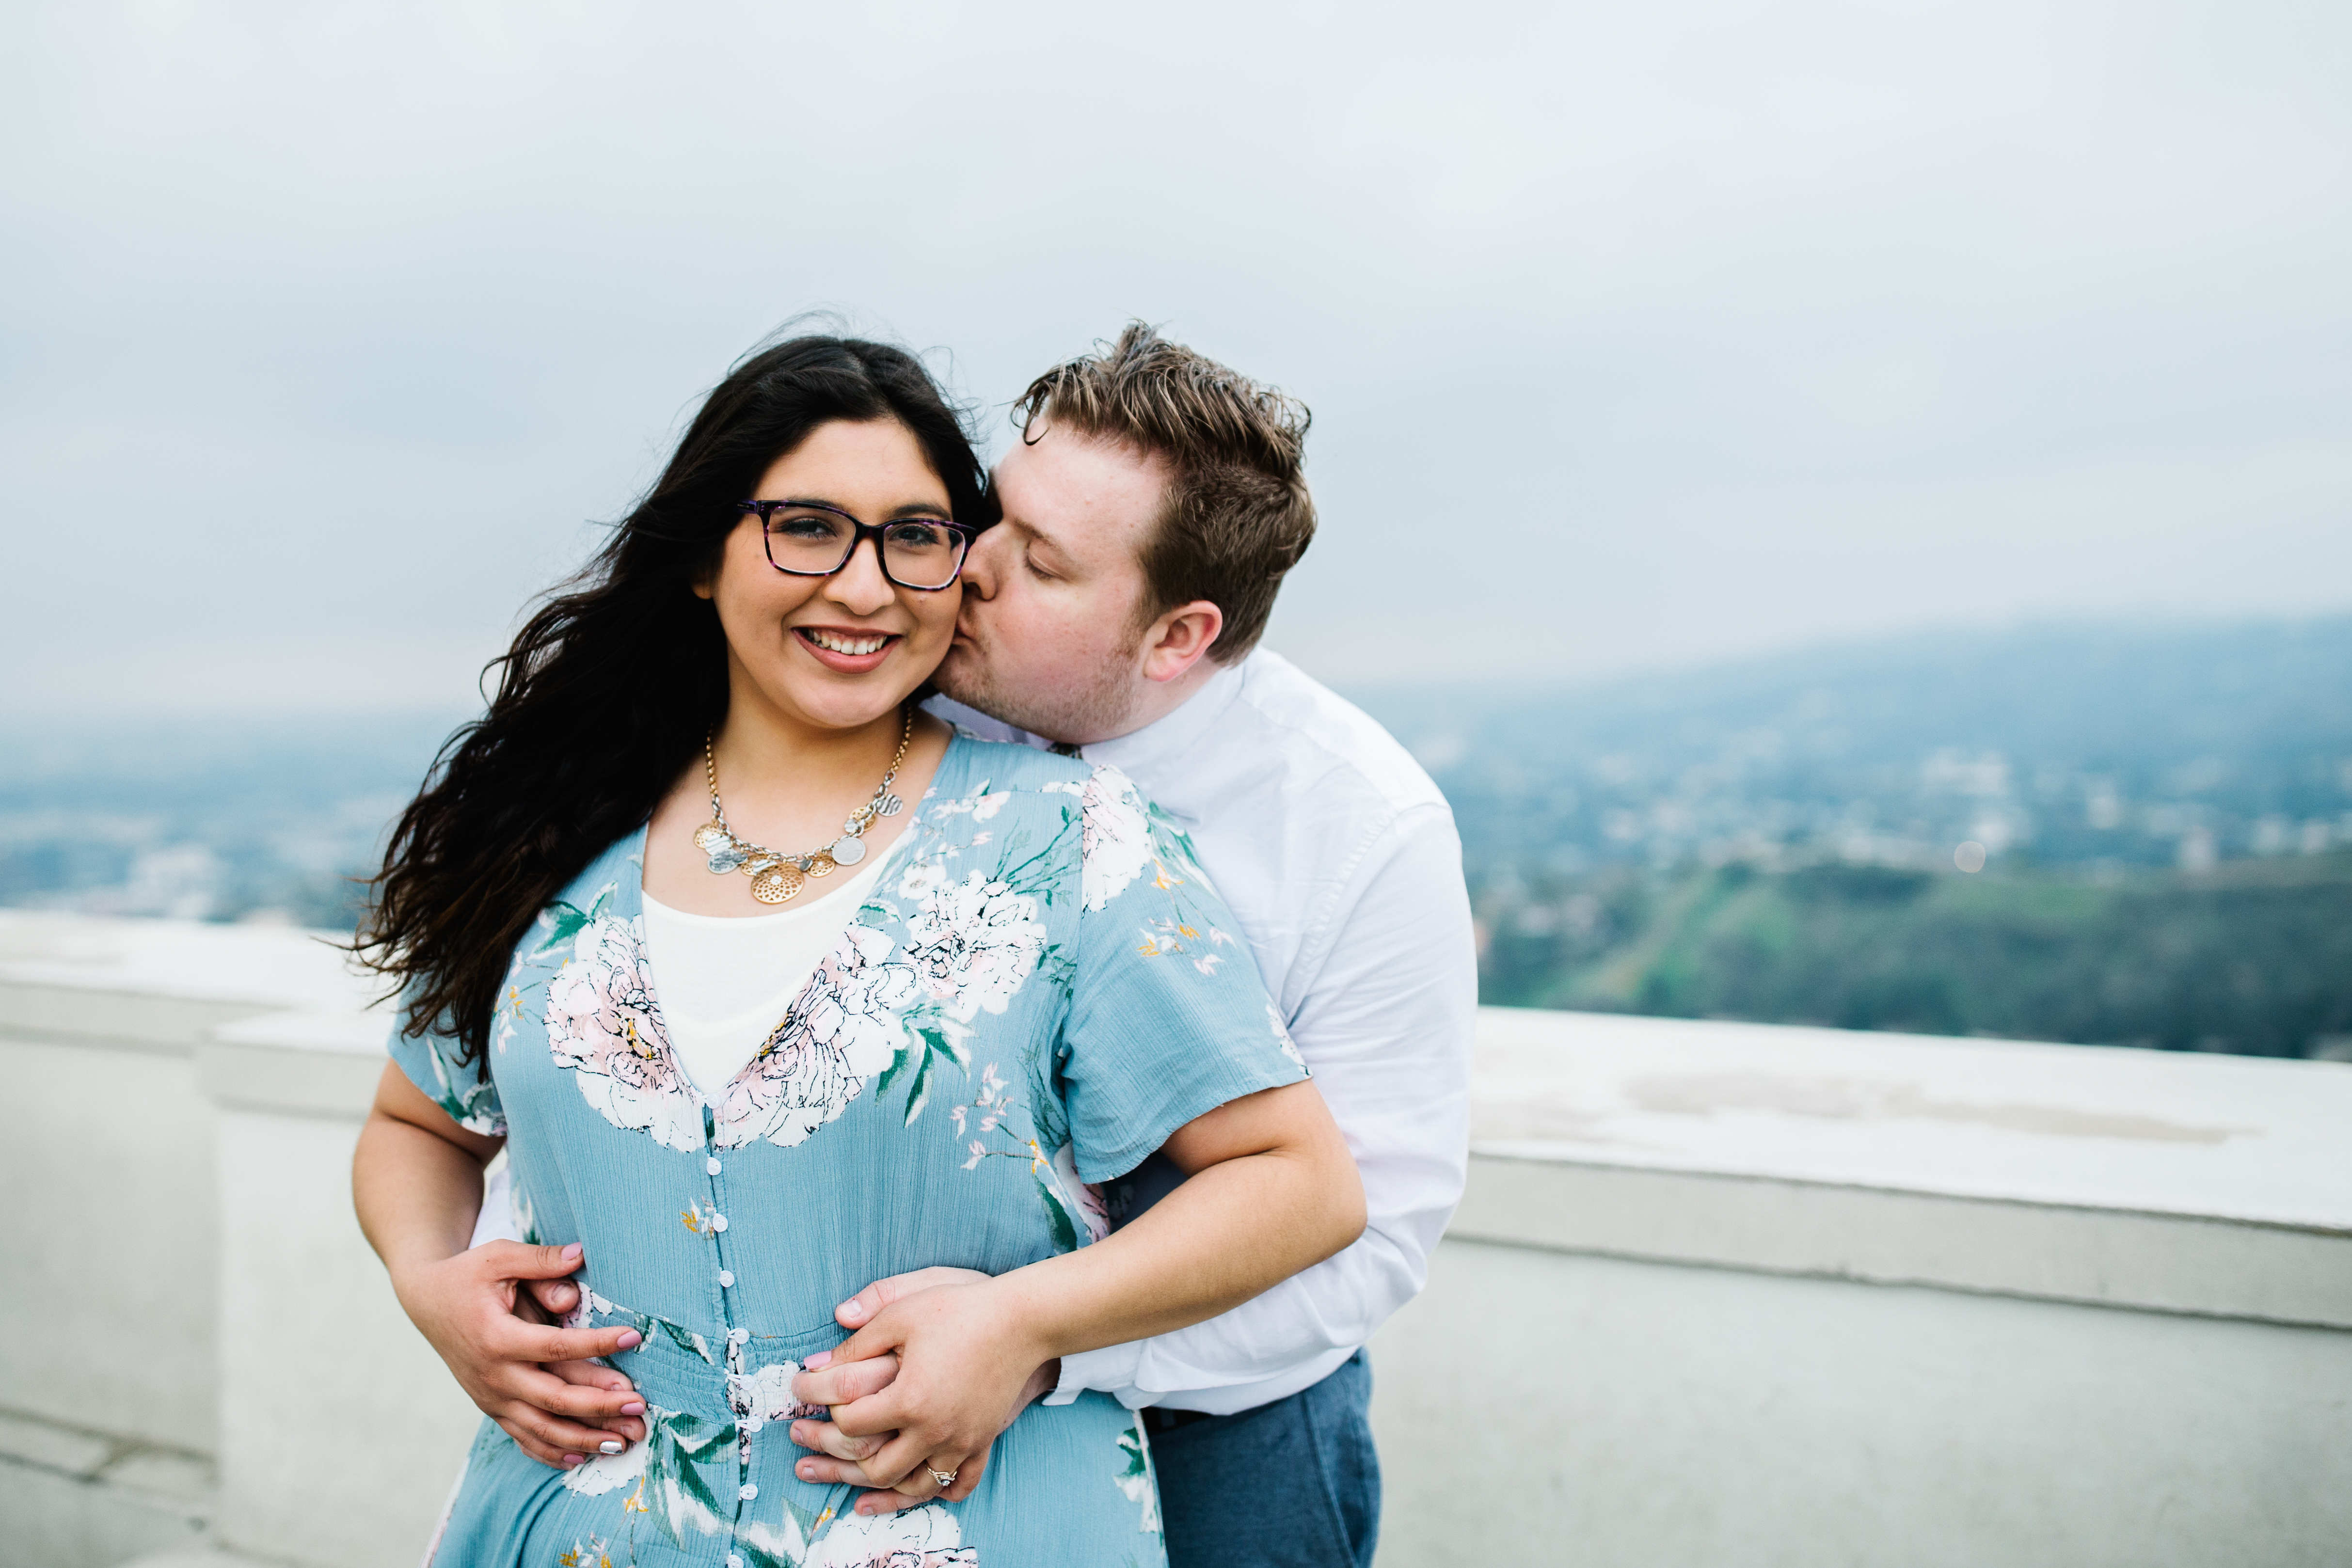 griffith observatory engagement photos Man kisses woman's cheek at Griffith Observatory in Los Angeles , California.